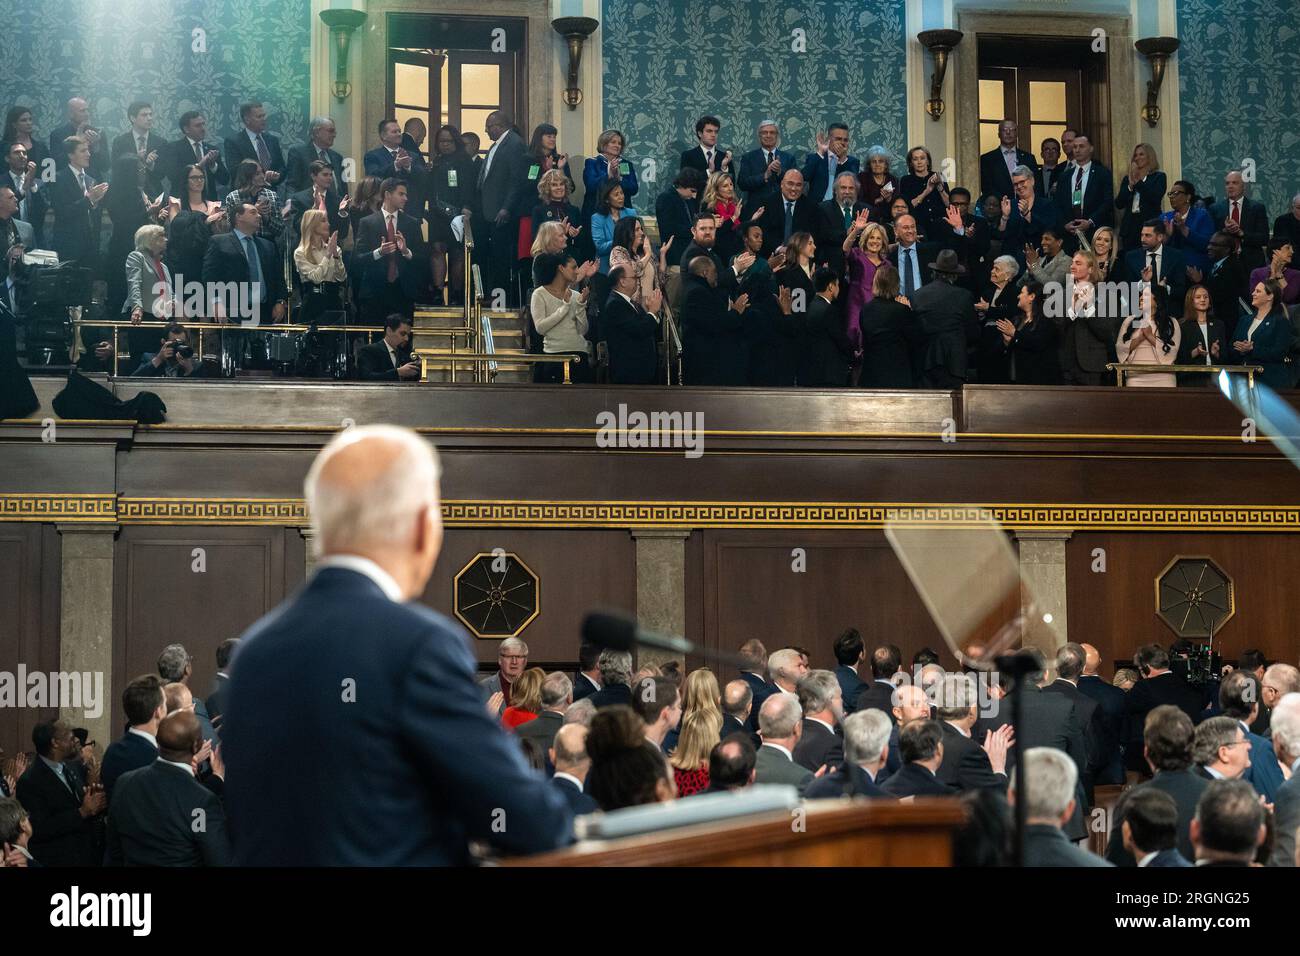 Reportage: President Biden's 2023 State of the Union Address - President Joe Biden delivers his State of the Union address, Tuesday, February 7, 2023, on the House floor of the U.S. Capitol Stock Photo